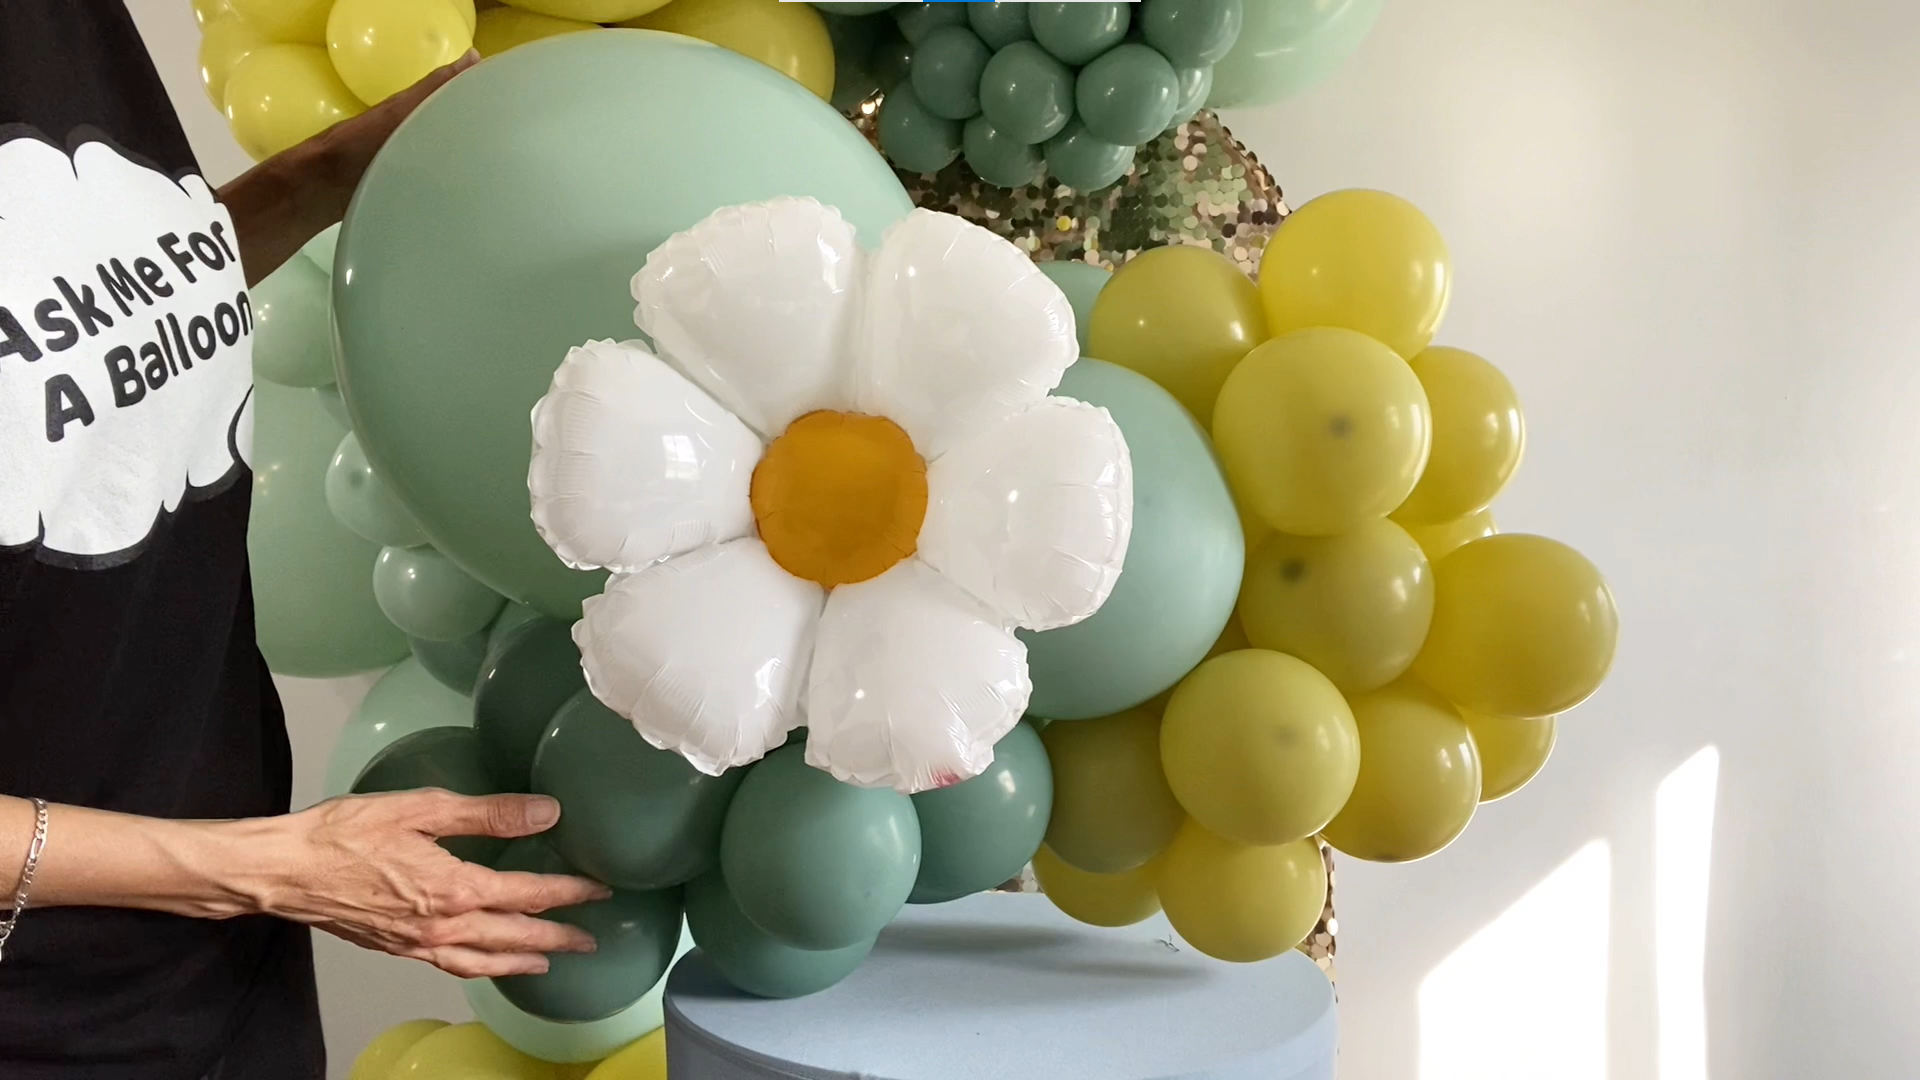 A daisy balloon with green and gold balloons on the background